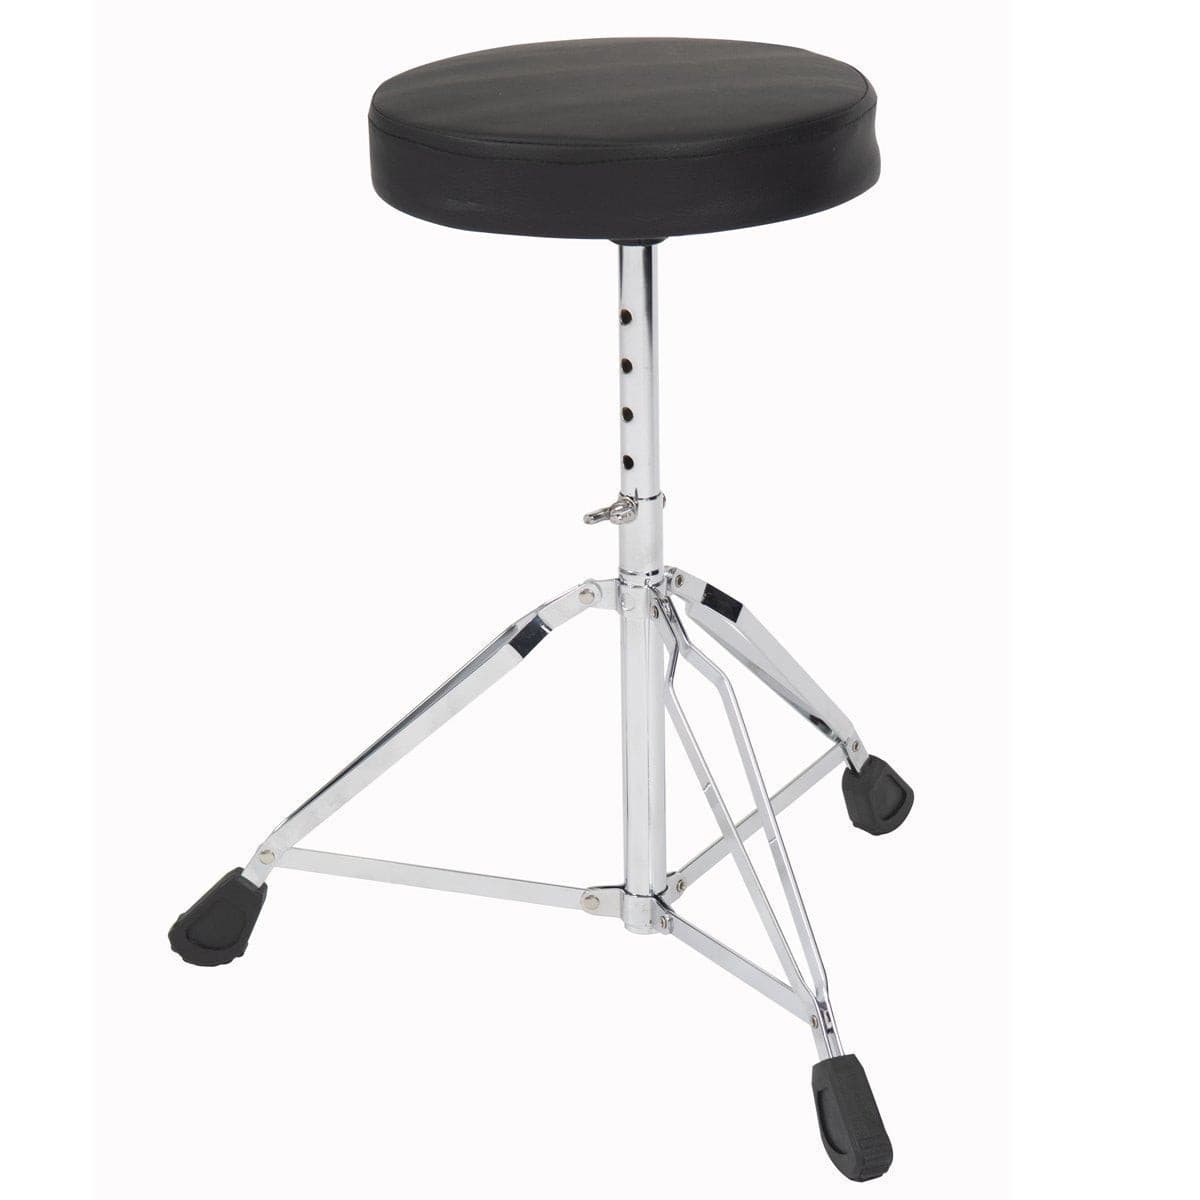 Kinsman Standard Series Drum Stool, Accessory for sale at Richards Guitars.